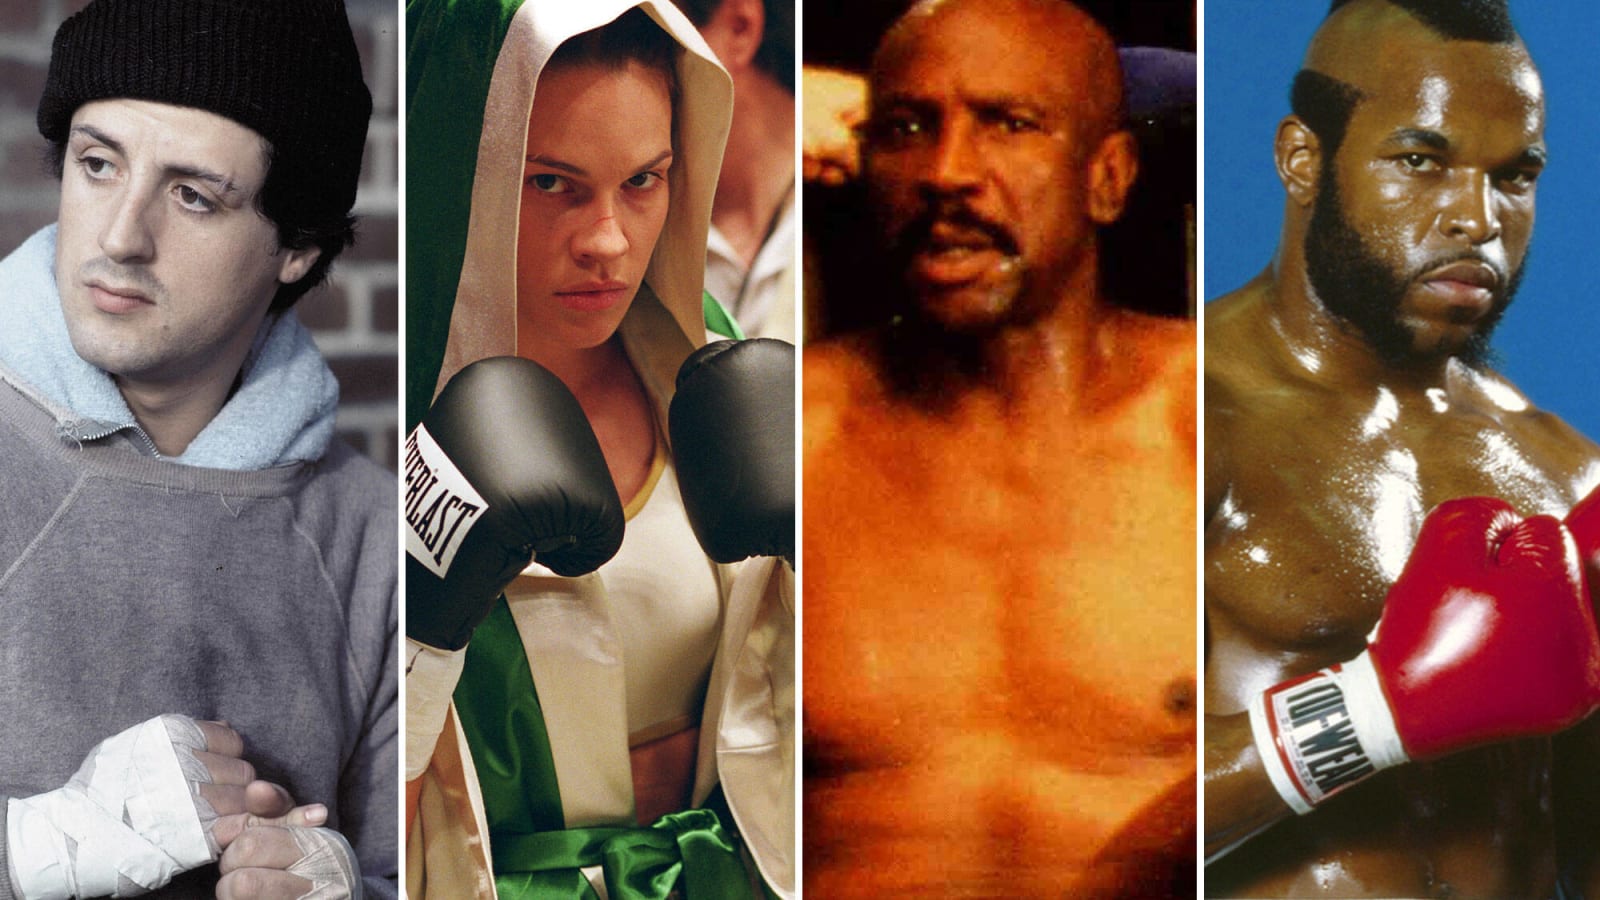 The 25 best pound-for-pound movie boxers